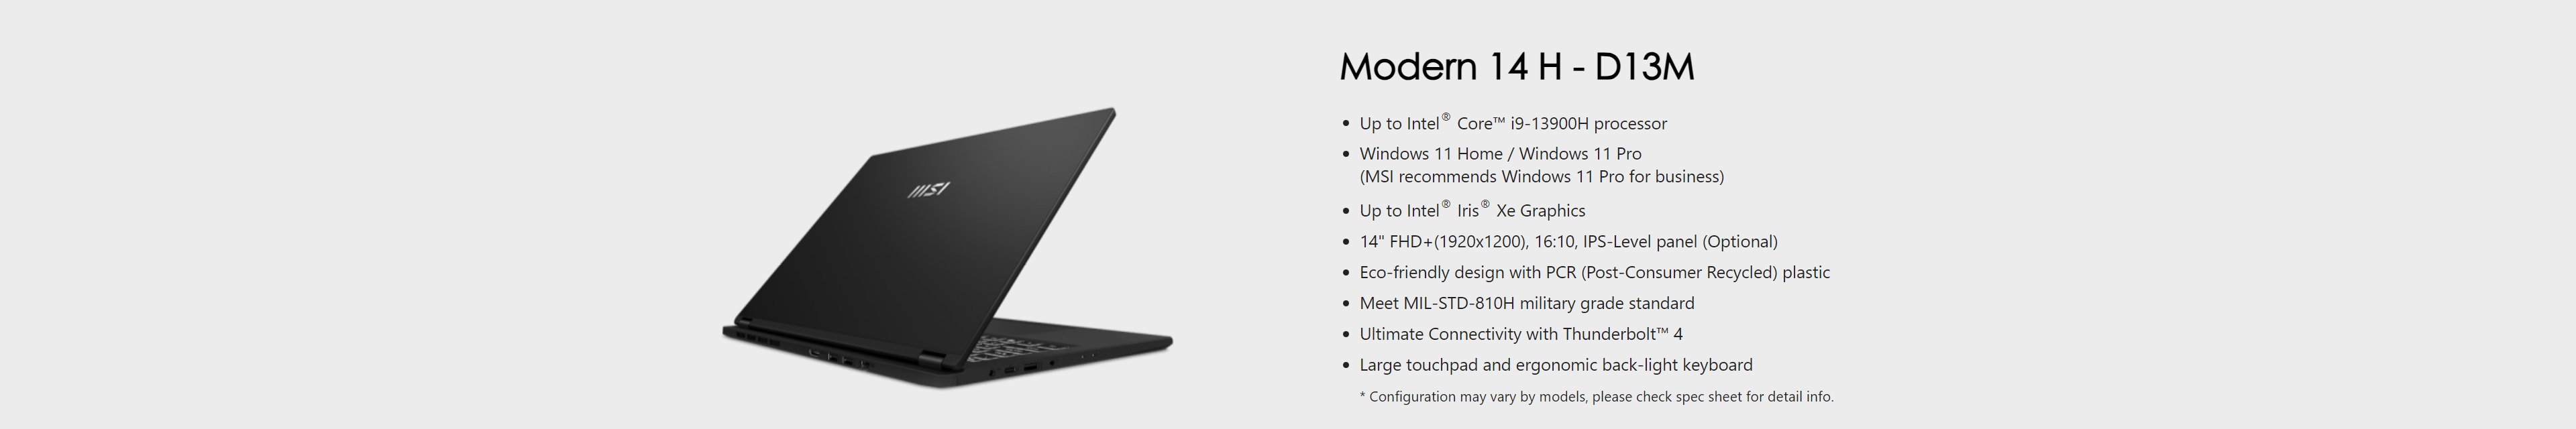 A large marketing image providing additional information about the product MSI Modern 14 H (D13M) - 14" 13th Gen i9, 16GB/1TB - Win 11 Notebook - Additional alt info not provided